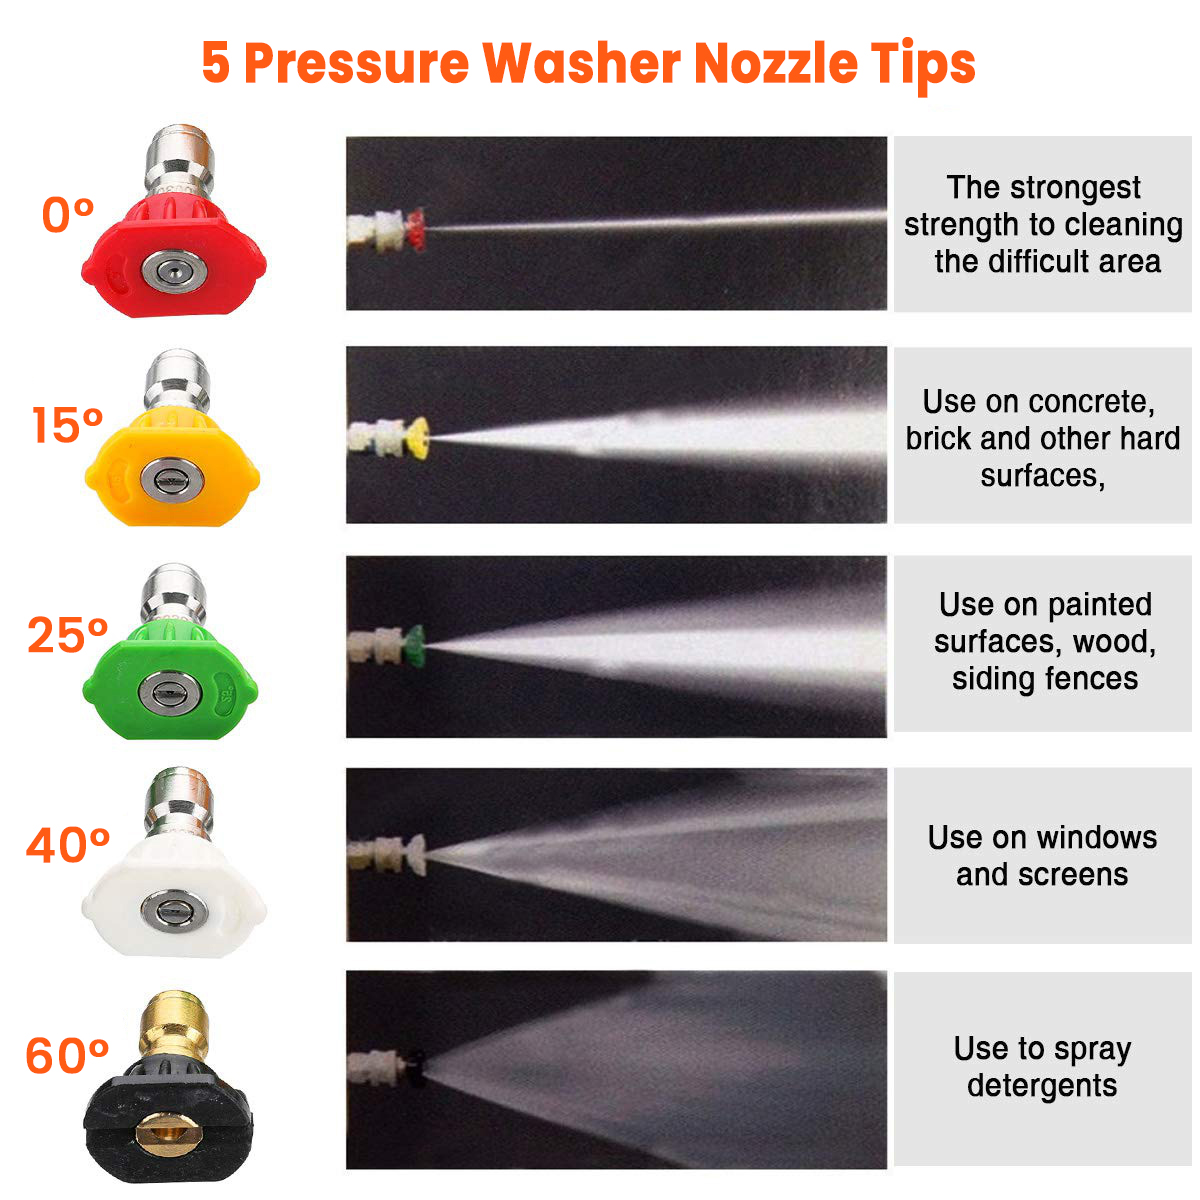 MATCC 1L Bottle Foam Lance Car Washer Tool with 5PCS Pressure Washer Spray Nozzles